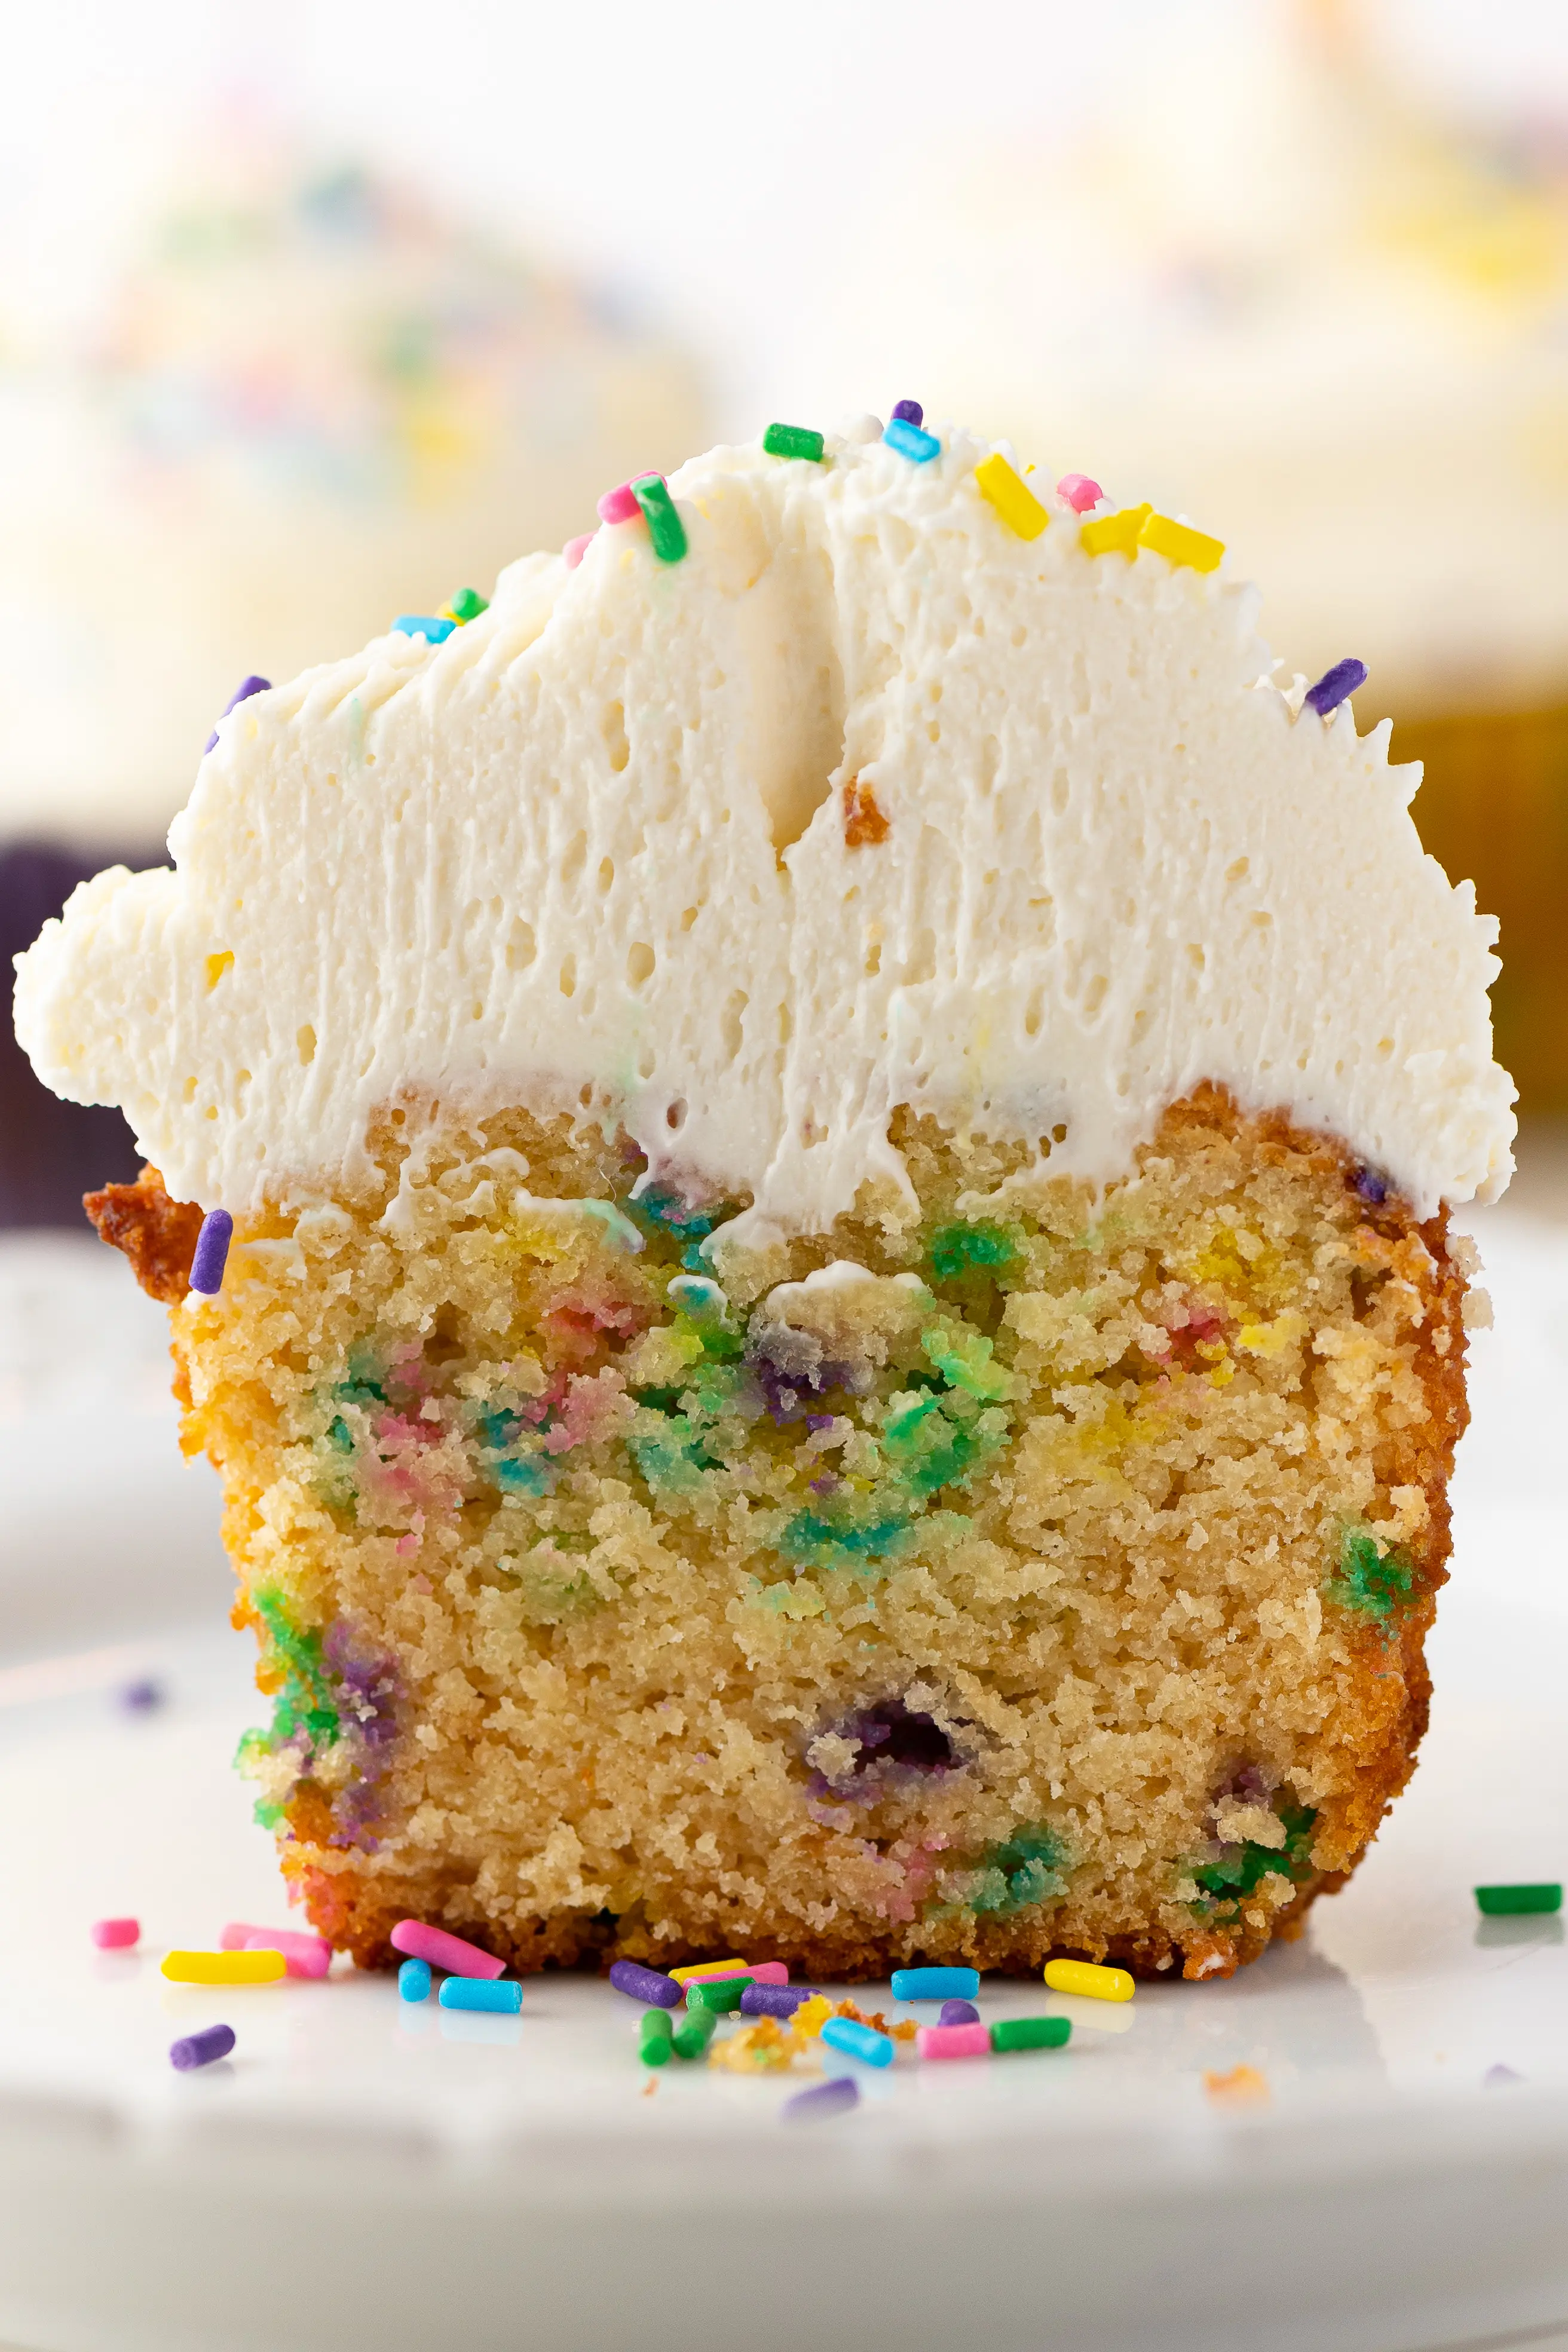 A birthday cupcake cut down the centre to show the inside.  The cupcake is topped with a mound of fresh white whipped cream frosting and colorful candy sprinkles.